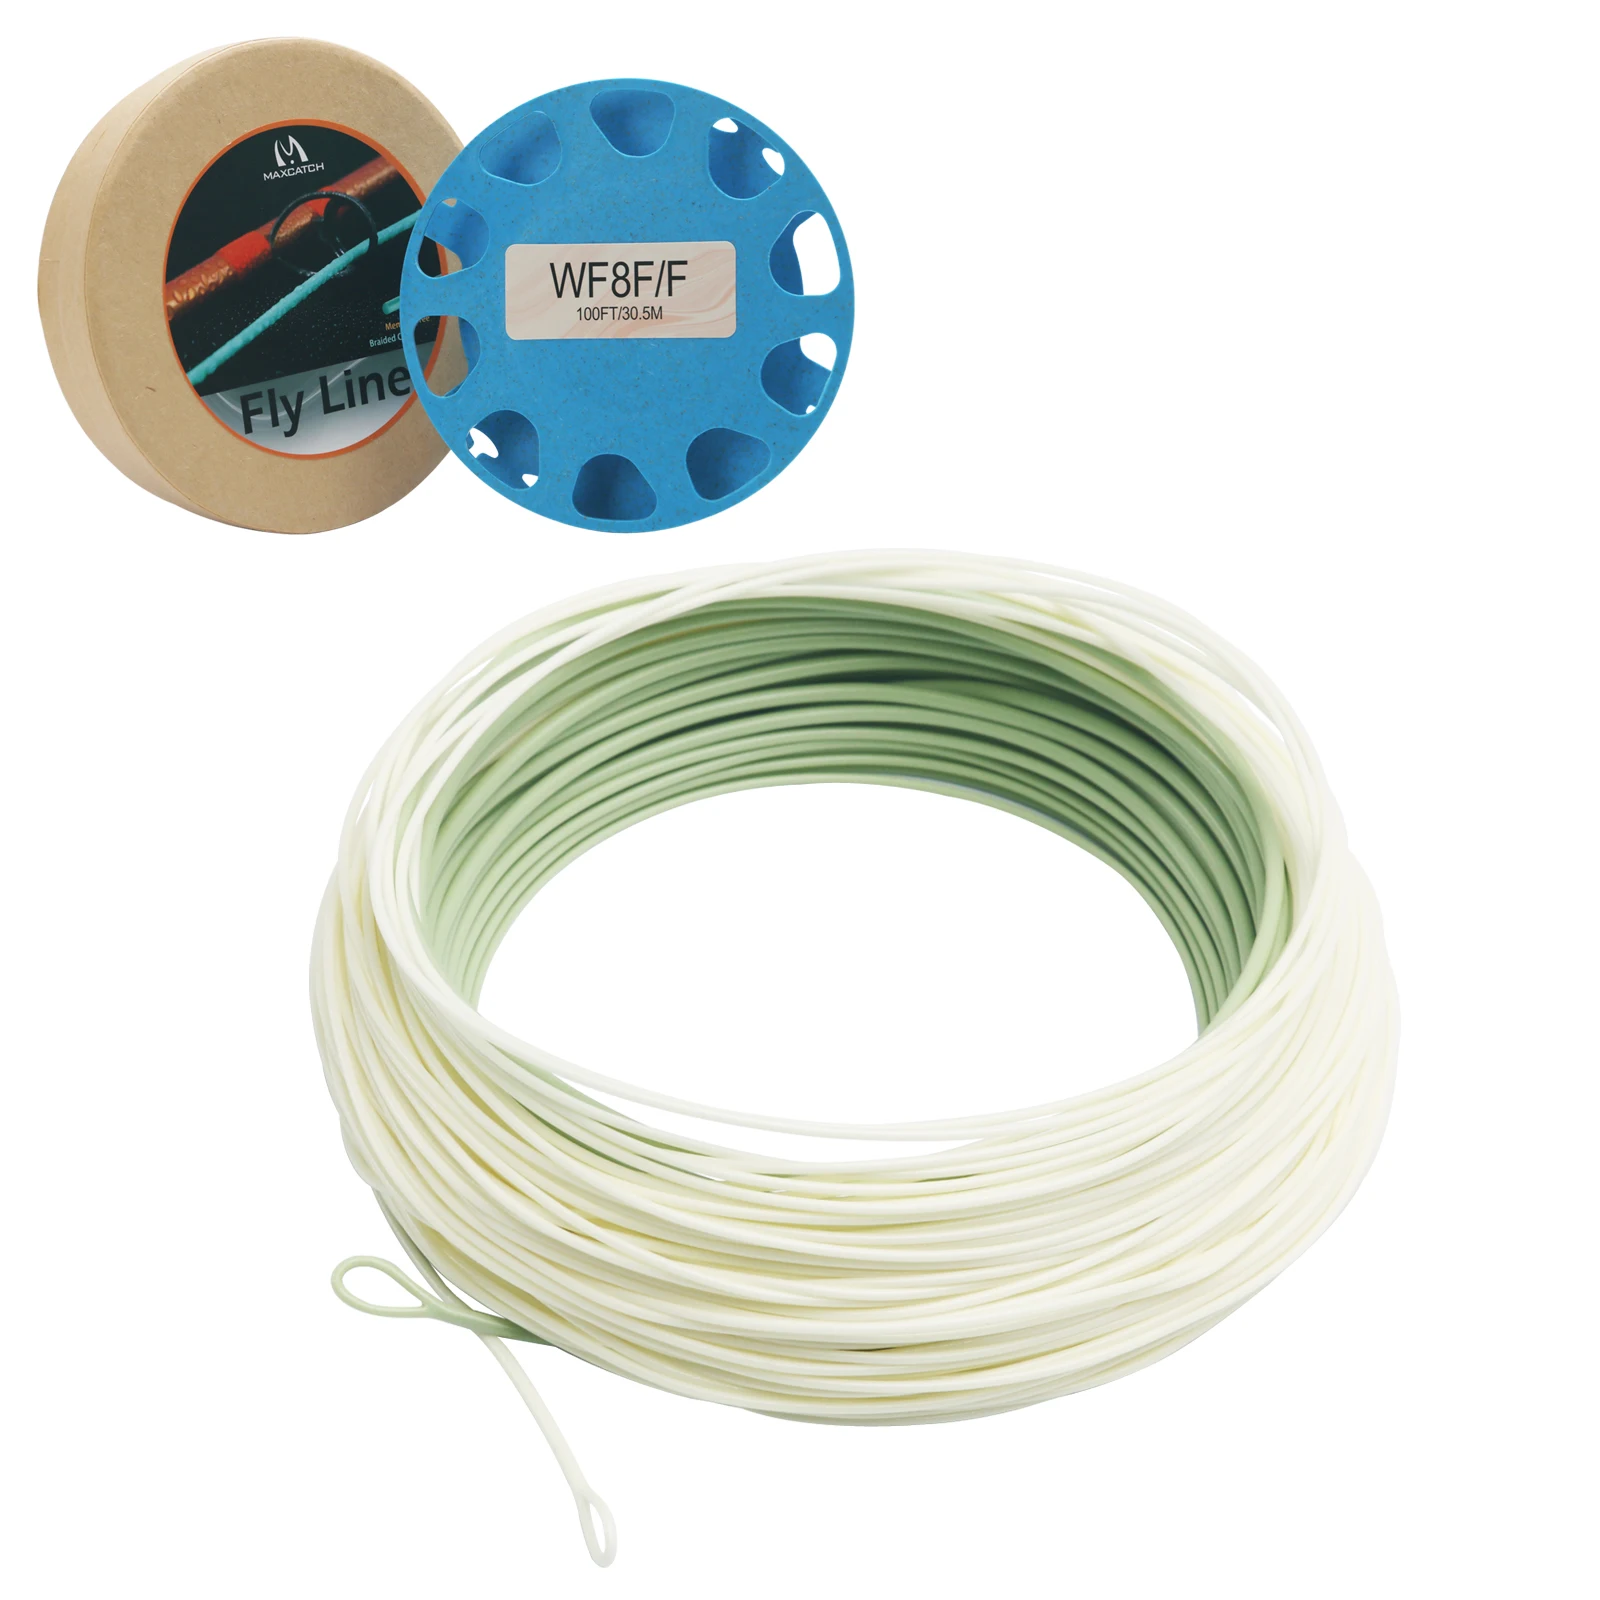 https://ae01.alicdn.com/kf/Sa456683e437c46289c37af6a7a53e231g/Maximumcatch-Outbound-Short-Fly-Fishing-Line-6-10wt-100FT-Weight-Forward-Saltwater-Fly-Line-With-2.jpg